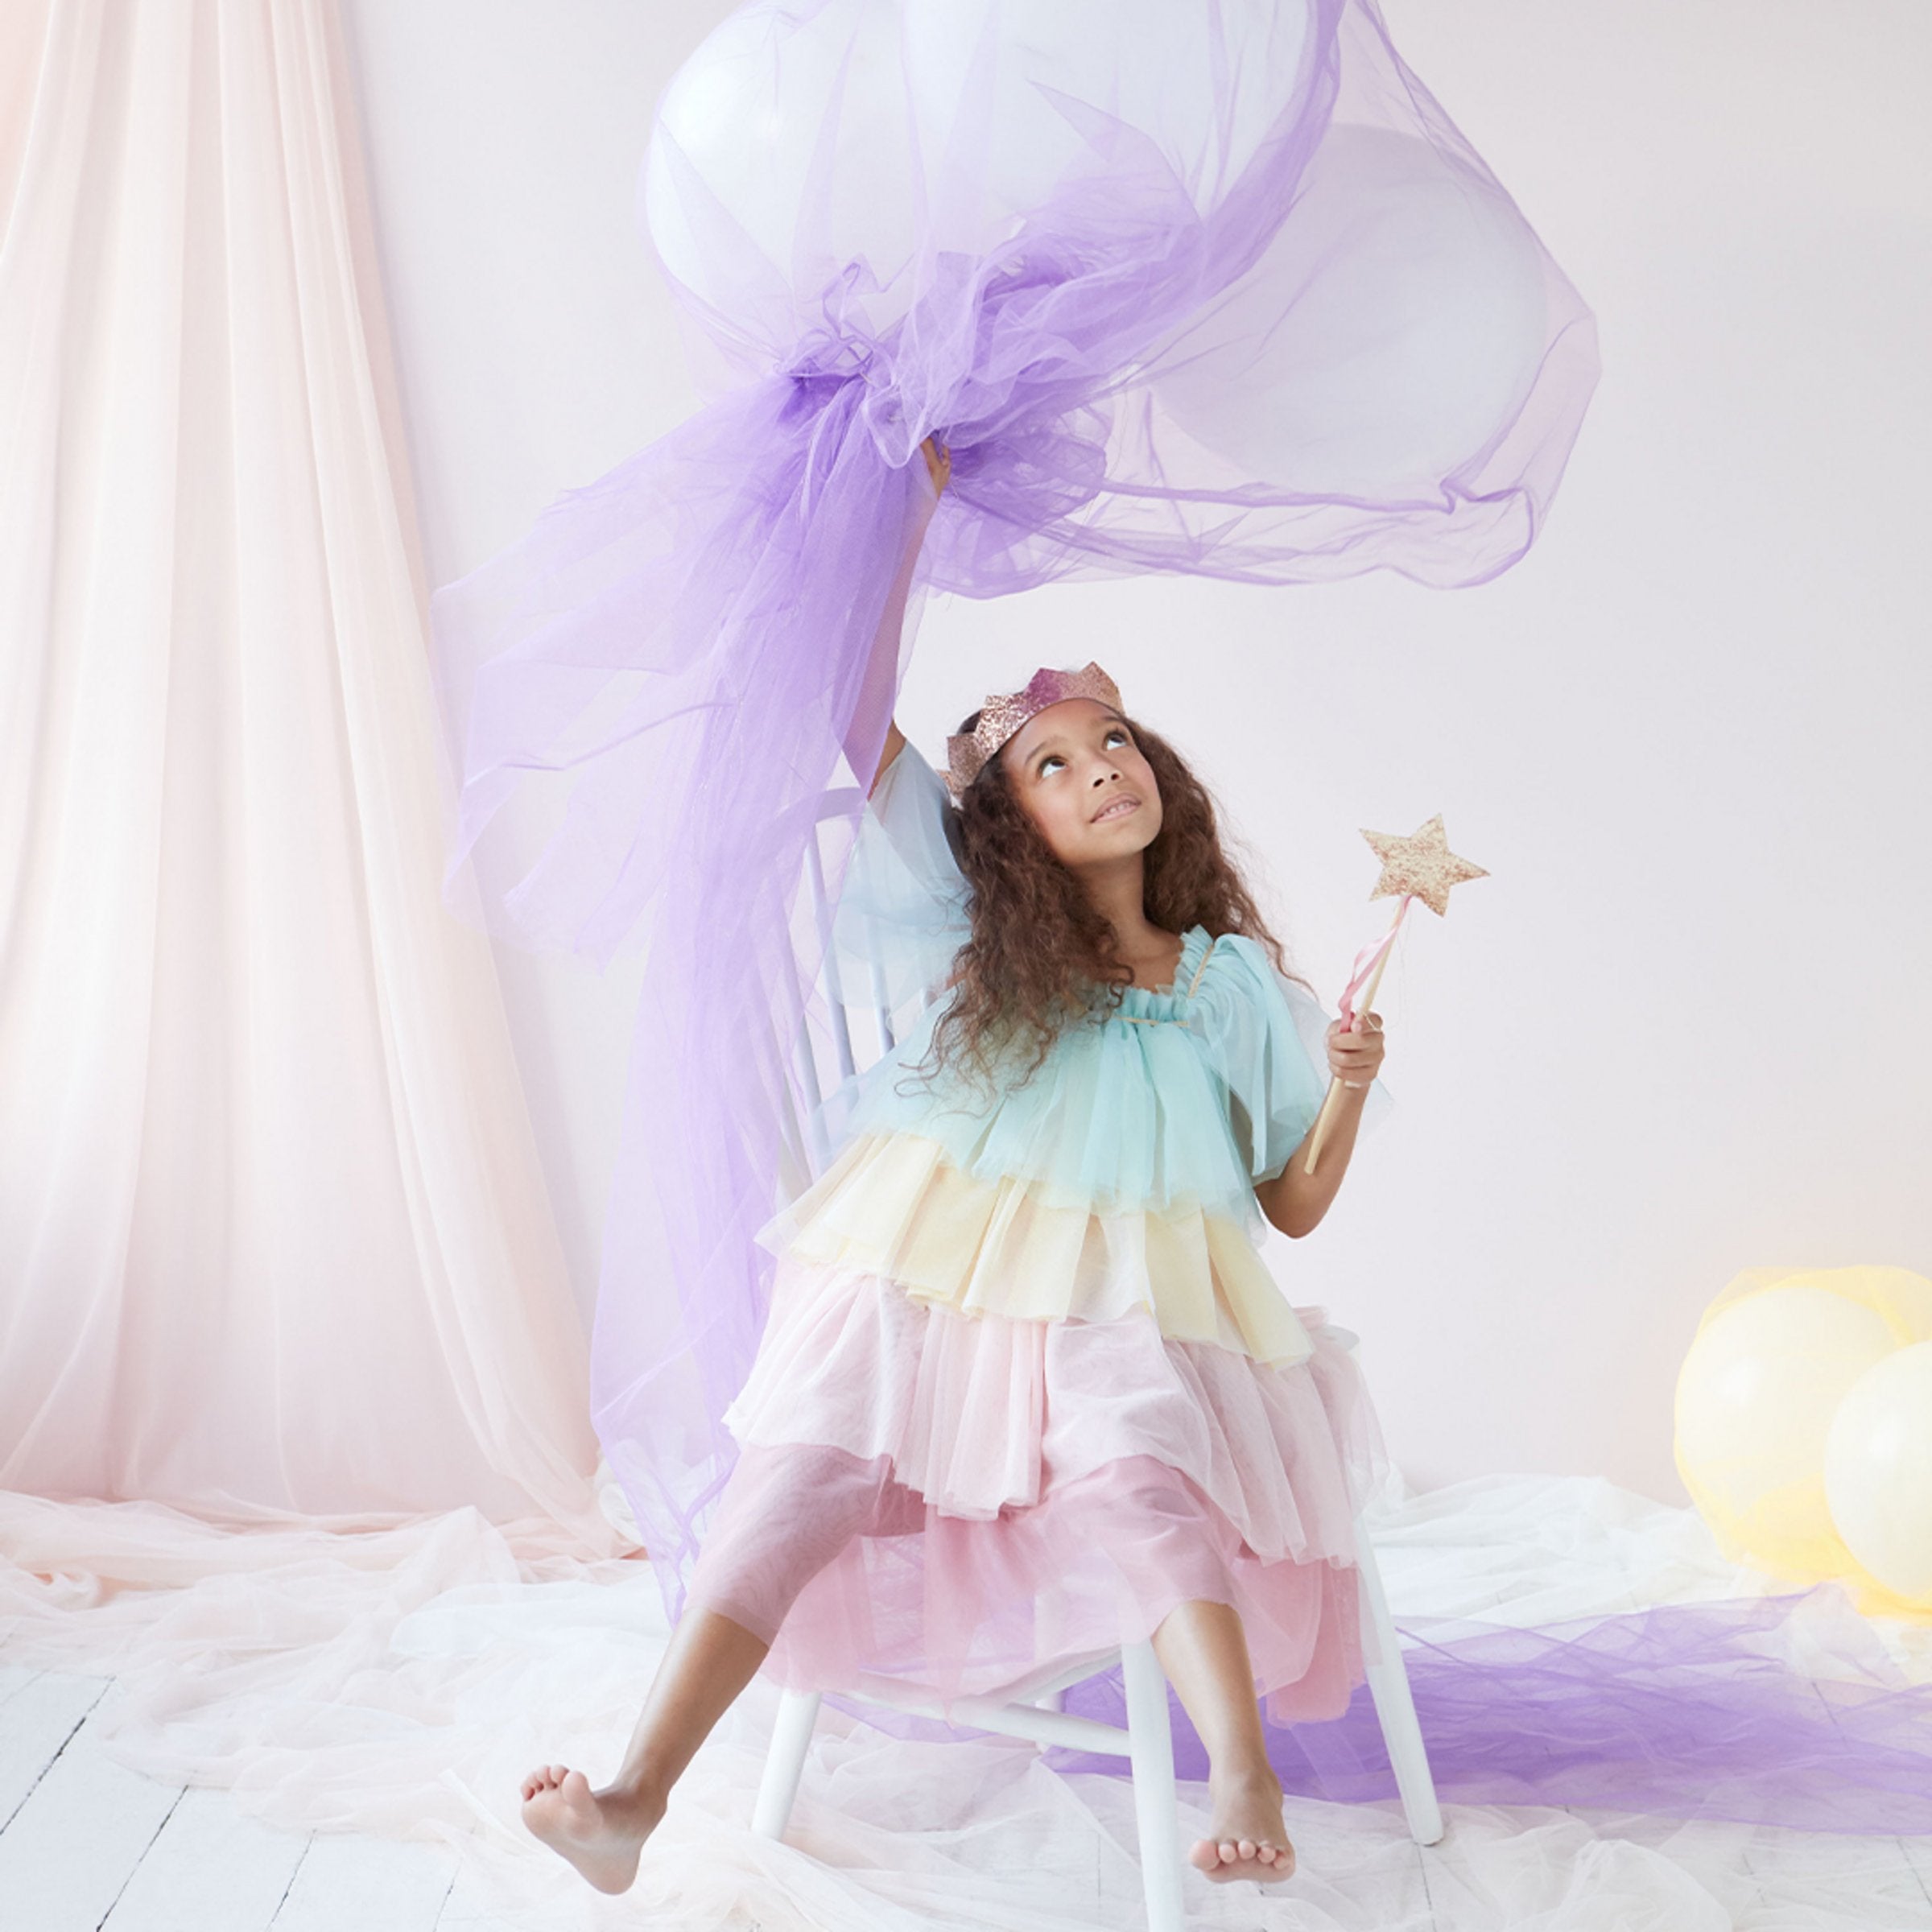 This princess costume for kids is made from colorful tulle layers and comes with a gold princess crown.